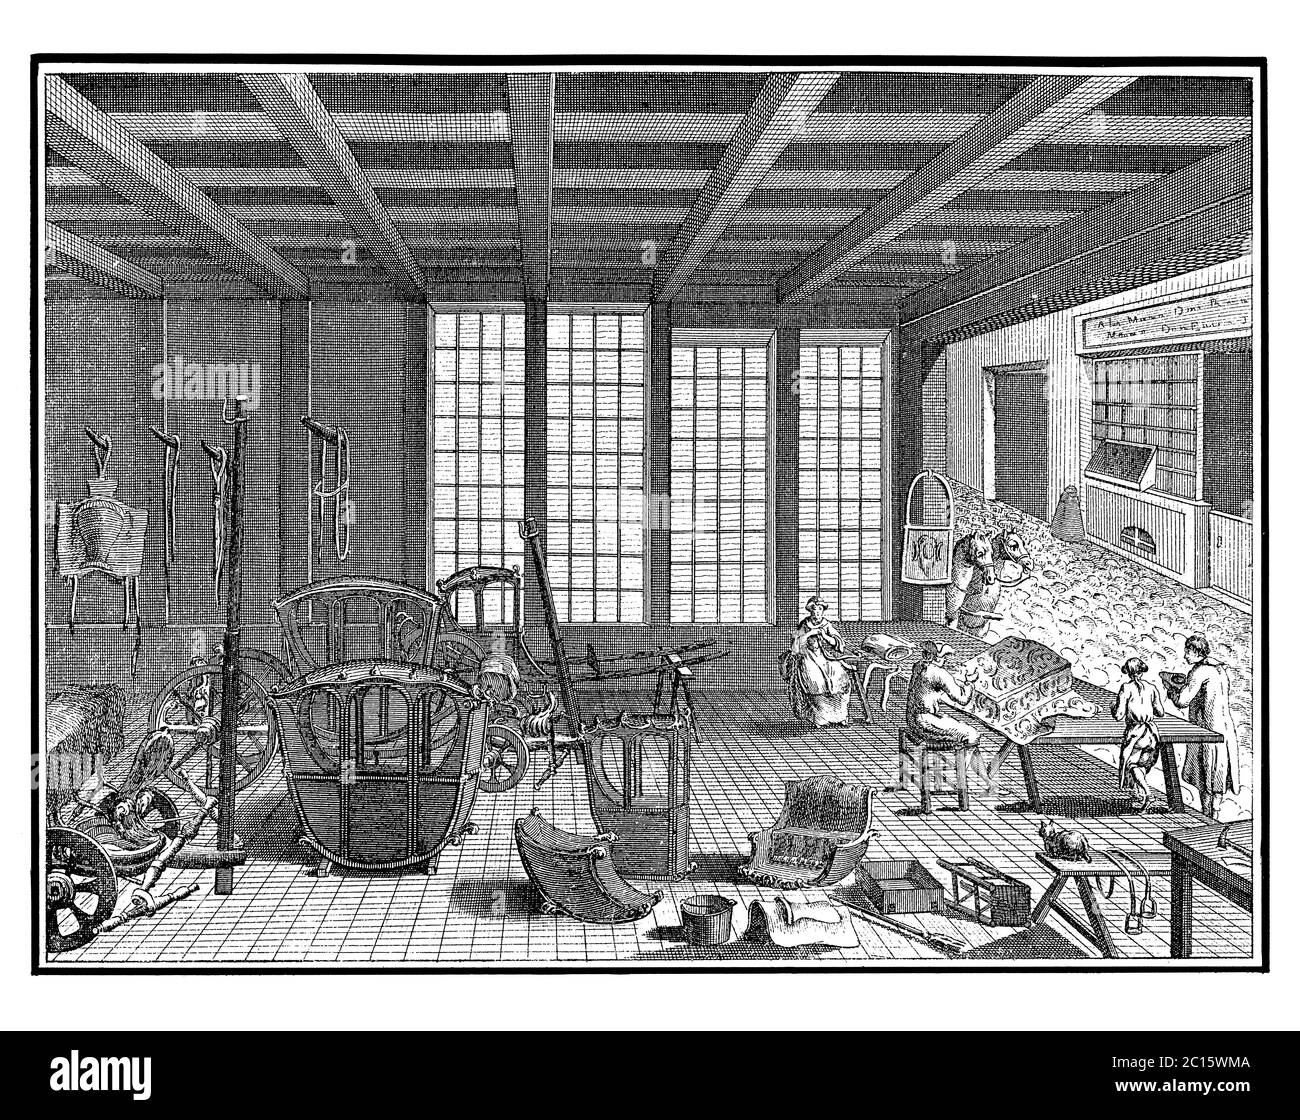 Antique illustration of carriage manufacturing. Published in 'A Diderot Pictorial Encyclopedia of Trades and Industry. Manufacturing and the Technical Stock Photo